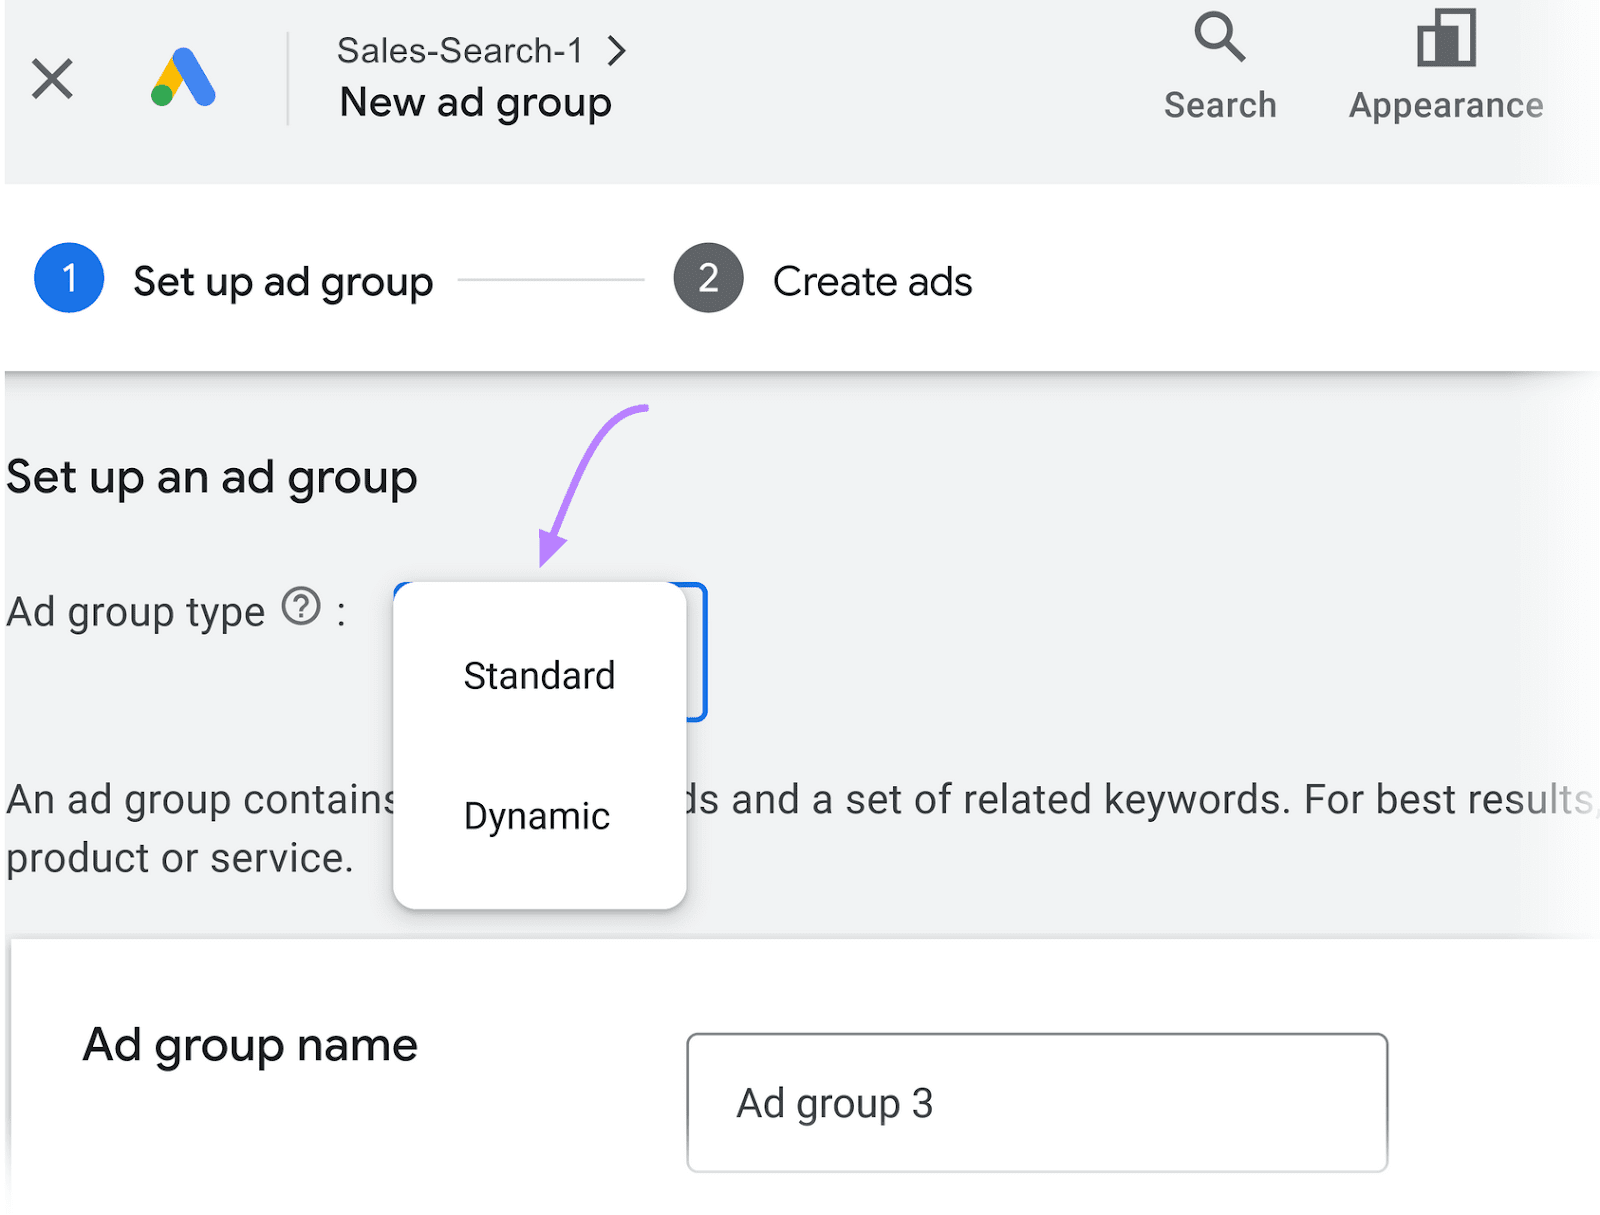 Google Ads showing the step to 'Set up an ad group' with options for selecting 'Standard' or 'Dynamic' ad group types.